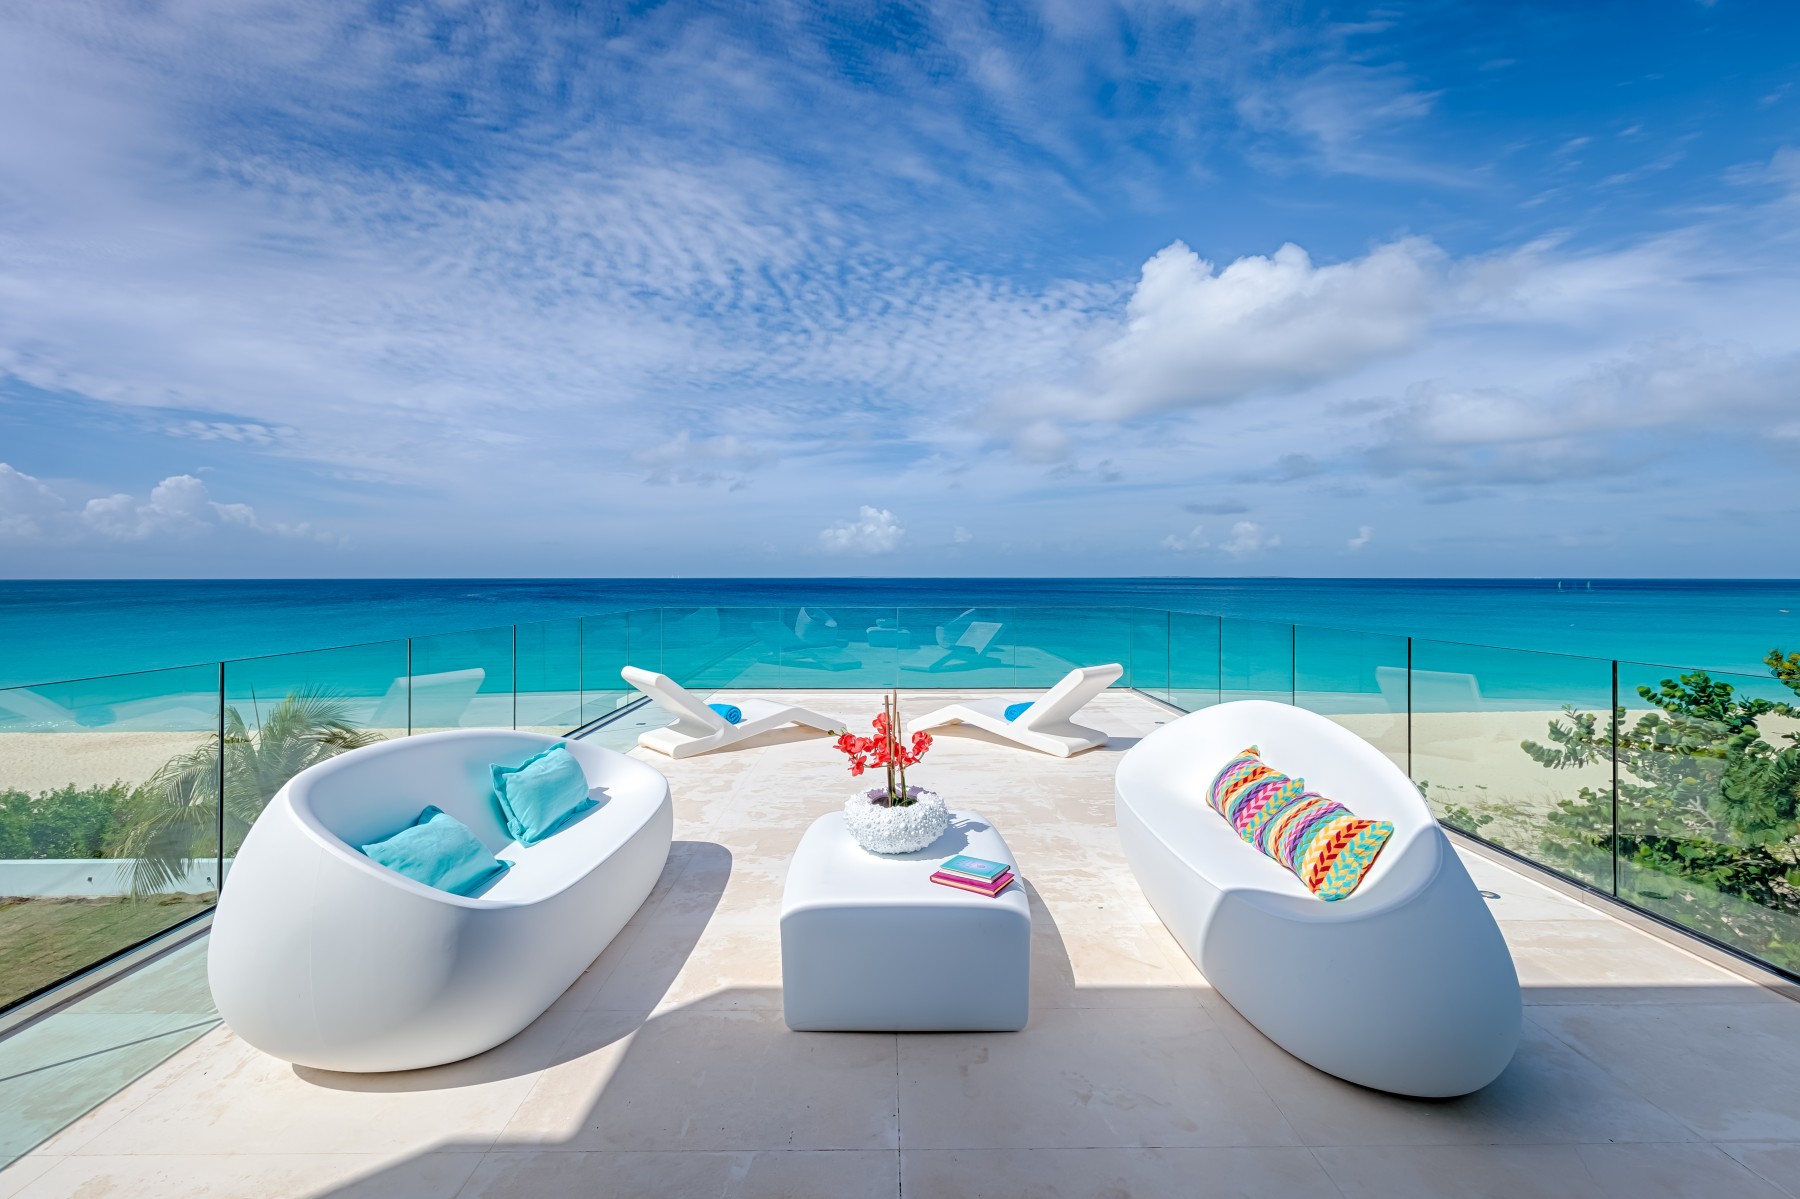 Modern terrace with stylish white furniture overlooking an endless ocean view, featuring a unique oval table and chic lounging chairs under a clear blue sky in Anguilla